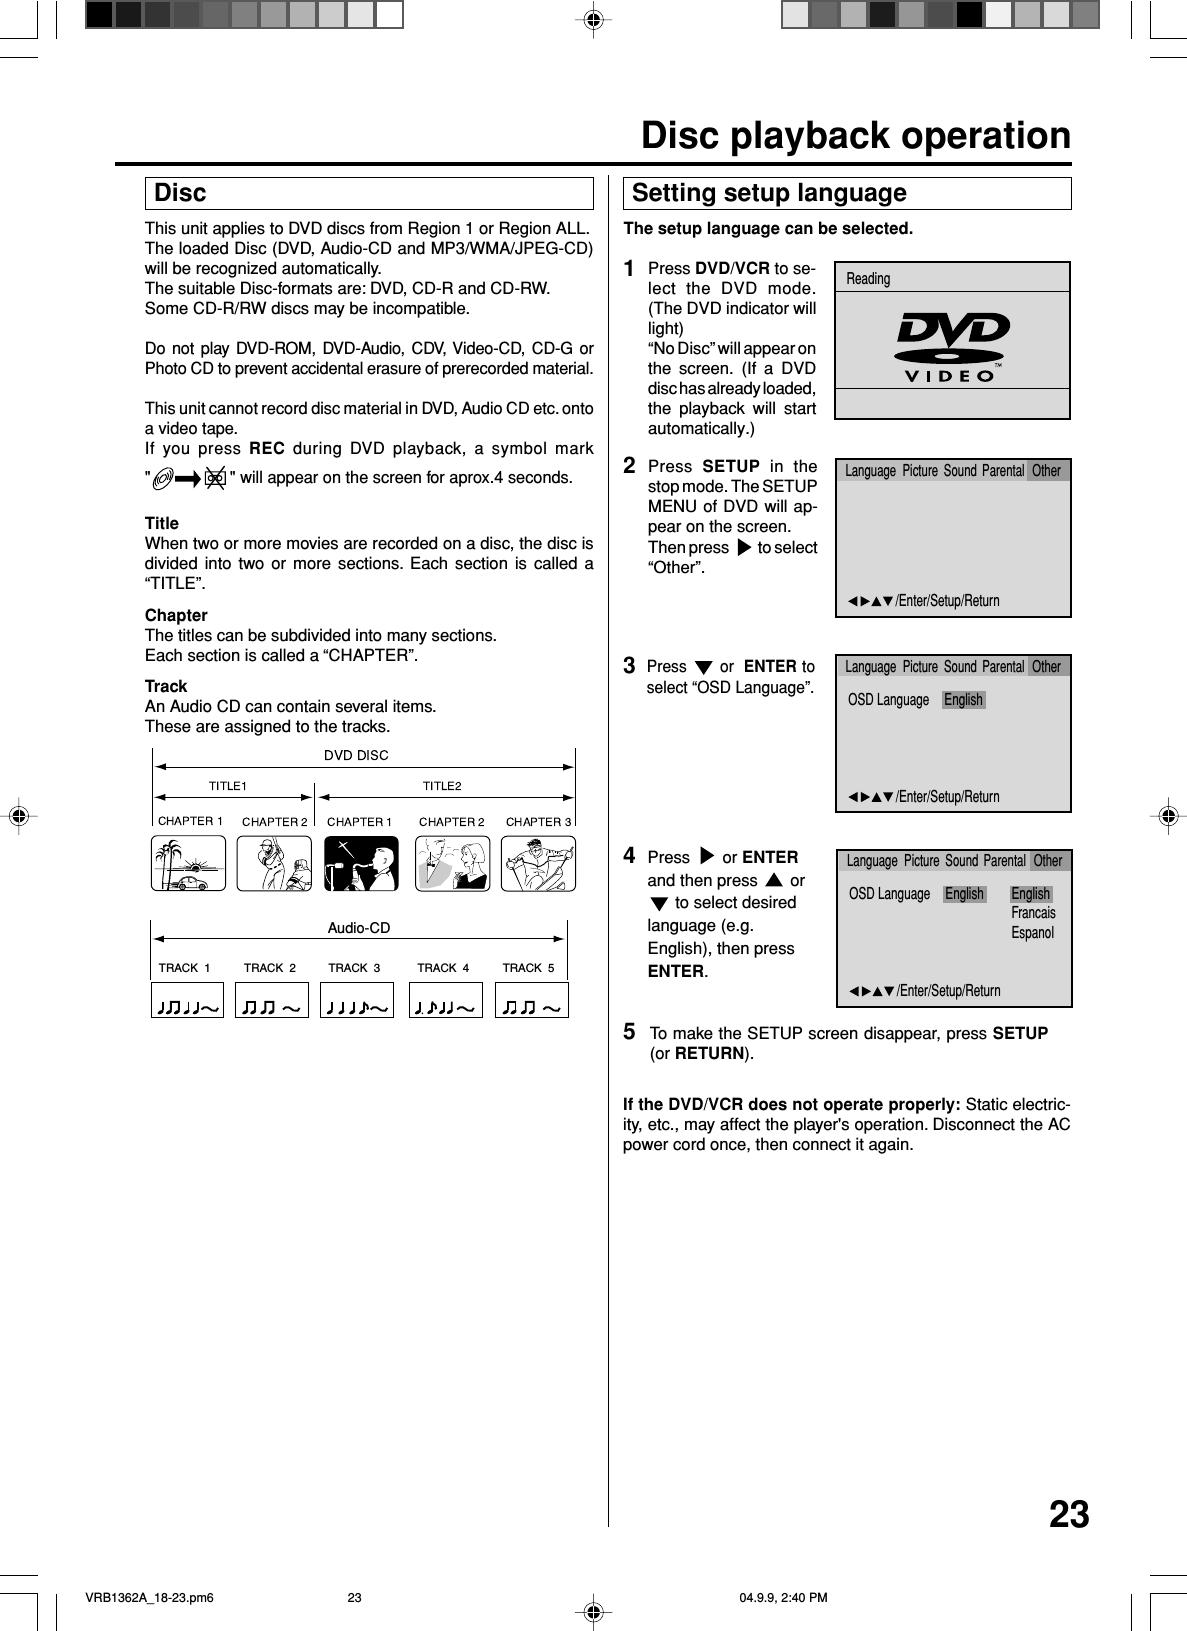 23This unit applies to DVD discs from Region 1 or Region ALL.The loaded Disc (DVD, Audio-CD and MP3/WMA/JPEG-CD)will be recognized automatically.The suitable Disc-formats are: DVD, CD-R and CD-RW.Some CD-R/RW discs may be incompatible.Do not play DVD-ROM, DVD-Audio, CDV, Video-CD, CD-G orPhoto CD to prevent accidental erasure of prerecorded material.This unit cannot record disc material in DVD, Audio CD etc. ontoa video tape.If you press REC during DVD playback, a symbol mark&quot;&quot; will appear on the screen for aprox.4 seconds.TitleWhen two or more movies are recorded on a disc, the disc isdivided into two or more sections. Each section is called a“TITLE”.ChapterThe titles can be subdivided into many sections.Each section is called a “CHAPTER”.TrackAn Audio CD can contain several items.These are assigned to the tracks.TRACK  1 TRACK  2 TRACK  3 TRACK  4 TRACK  5CD DiscAudio-CD Setting setup language4The setup language can be selected.Press   or ENTERand then press   or to select desiredlanguage (e.g.English), then pressENTER.2Press  SETUP in thestop mode. The SETUPMENU of DVD will ap-pear on the screen.Then press   to select“Other”.5To make the SETUP screen disappear, press SETUP(or RETURN).If the DVD/VCR does not operate properly: Static electric-ity, etc., may affect the player&apos;s operation. Disconnect the ACpower cord once, then connect it again.3Press   or  ENTER toselect “OSD Language”.1Press DVD/VCR to se-lect the DVD mode.(The DVD indicator willlight)“No Disc” will appear onthe screen. (If a DVDdisc has already loaded,the playback will startautomatically.)OSD Language English EnglishFrancaisEspanol/Enter/Setup/ReturnLanguage Picture Parental OtherSoundOSD Language English/Enter/Setup/ReturnLanguage Picture Parental OtherSound/Enter/Setup/ReturnLanguage Picture Parental OtherSoundReadingDisc playback operationVRB1362A_18-23.pm6 04.9.9, 2:40 PM23